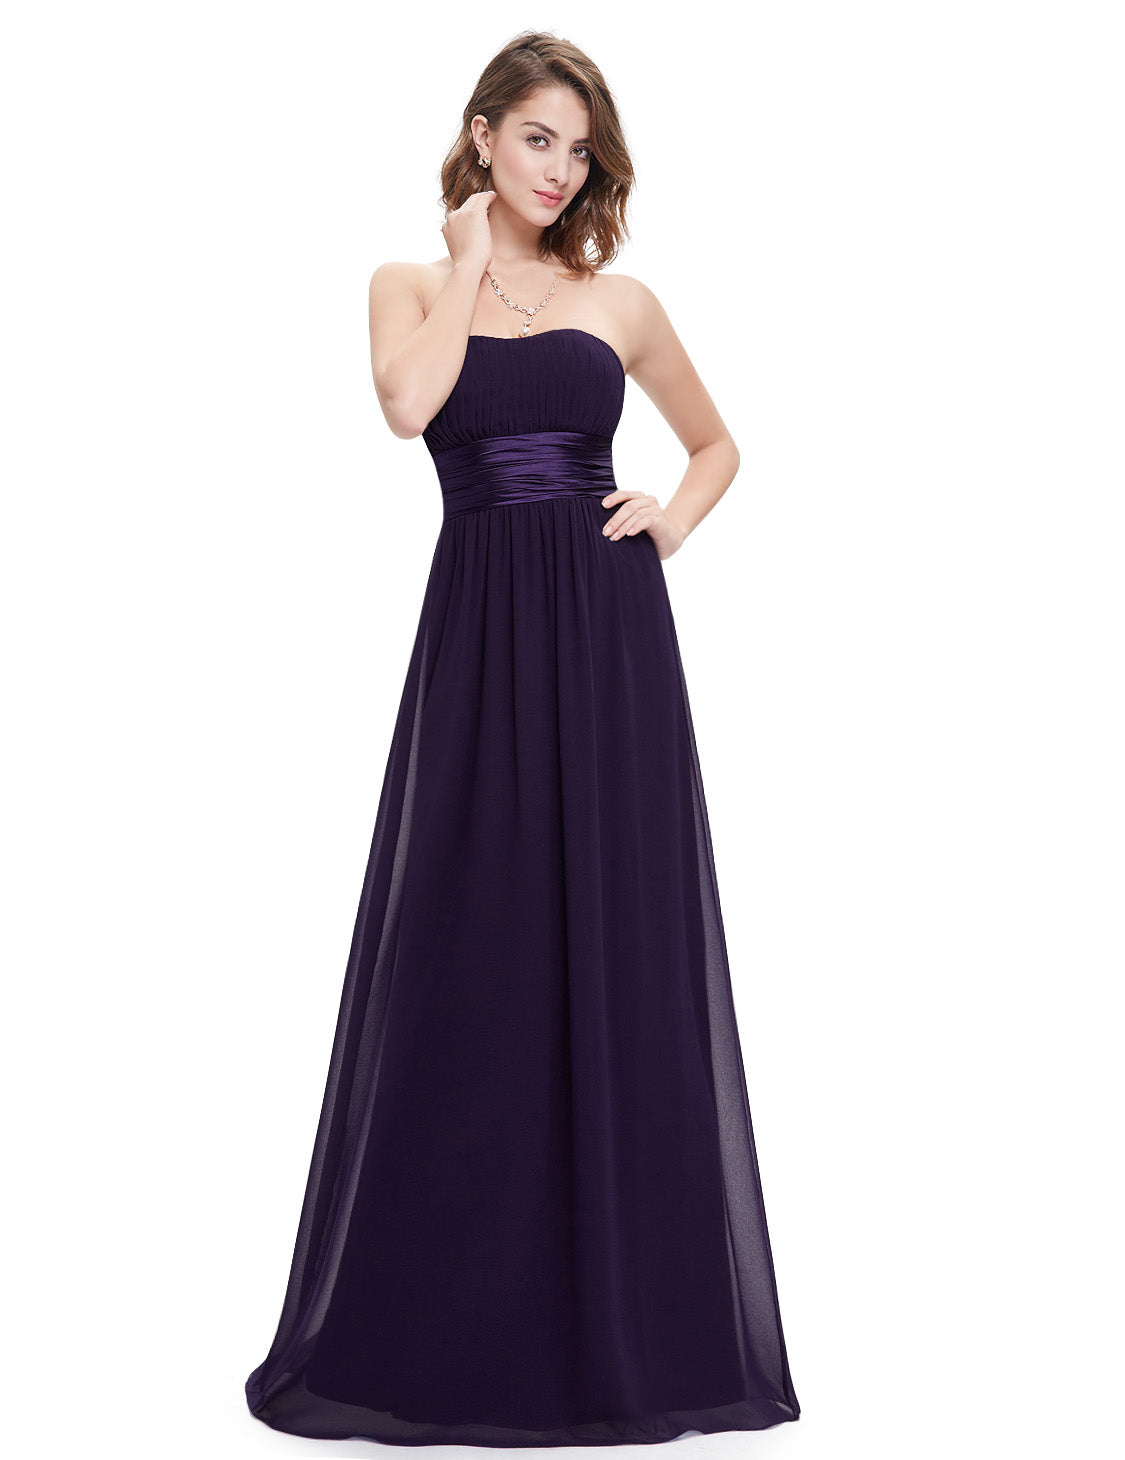 Strapless Ruched Bust Burgundy Chiffon Long Evening Dress EP09955